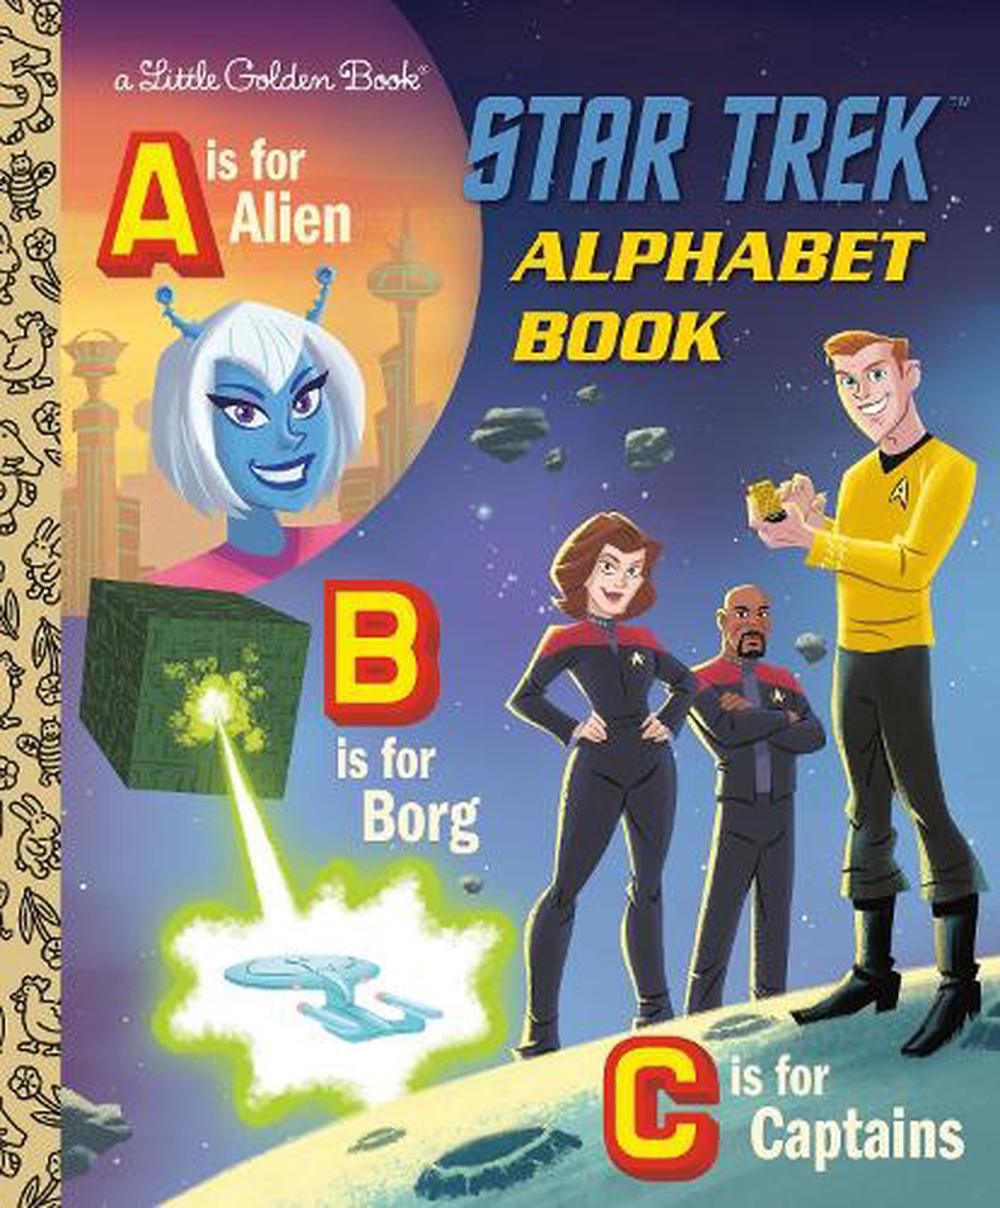 Star Trek Abc Book by Golden Books (English) Hardcover Book Free